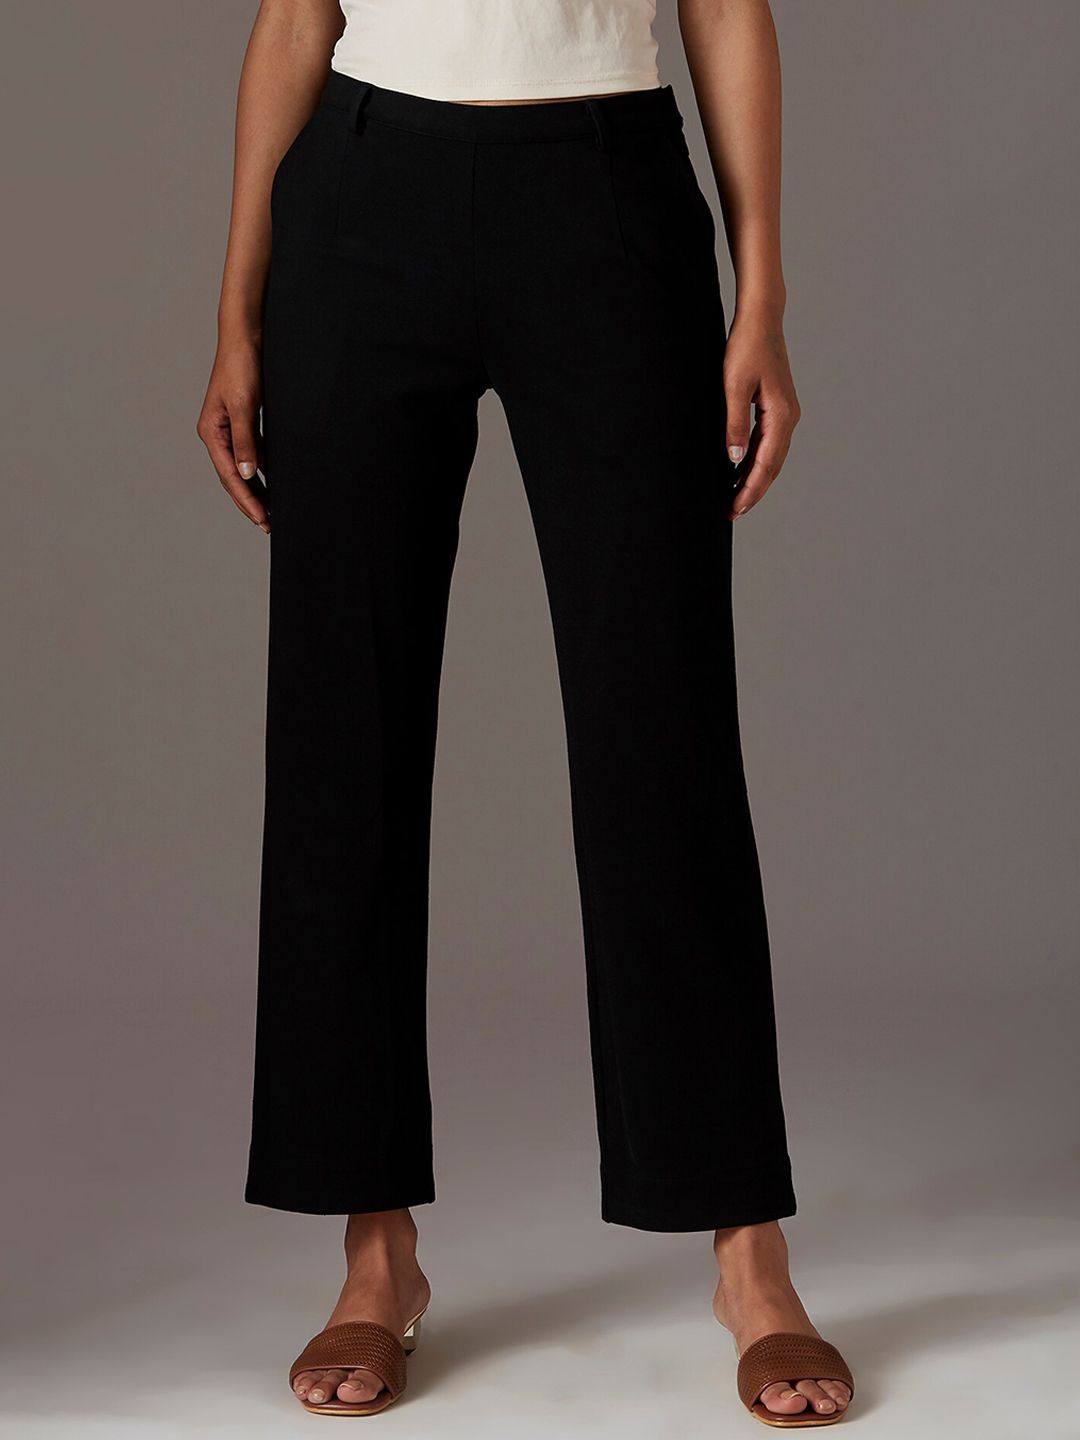 W Women Black Solid Regular Fit Trouser Price in India